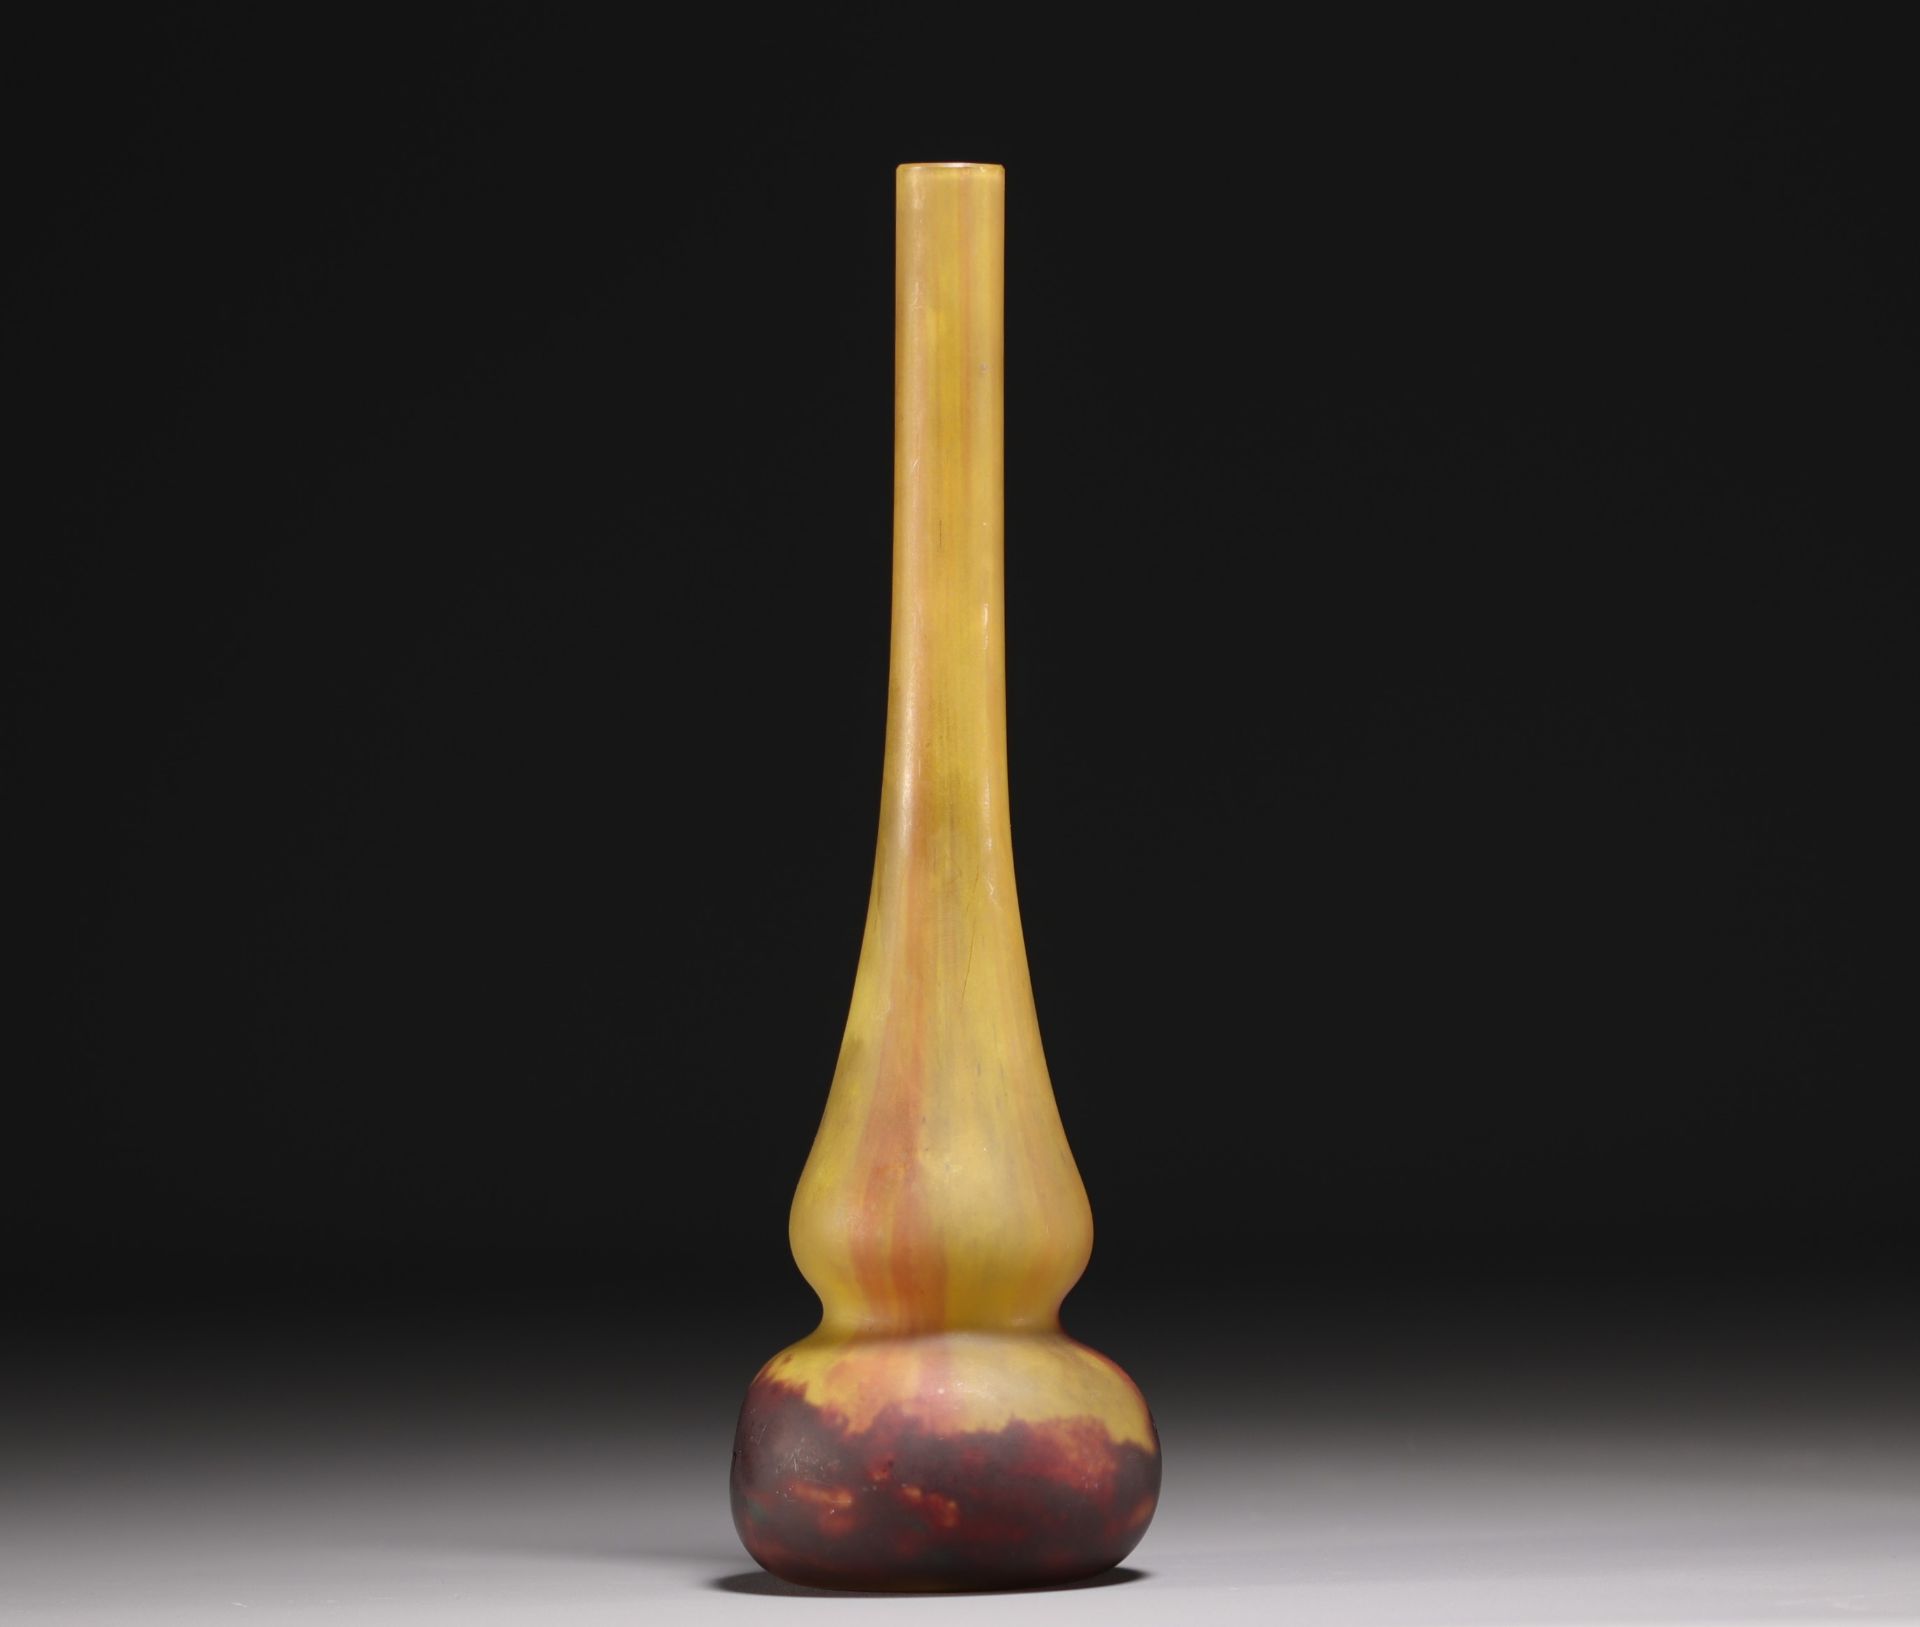 DAUM Nancy - Soliflore vase in shades of yellow and violet, signed. - Image 2 of 3